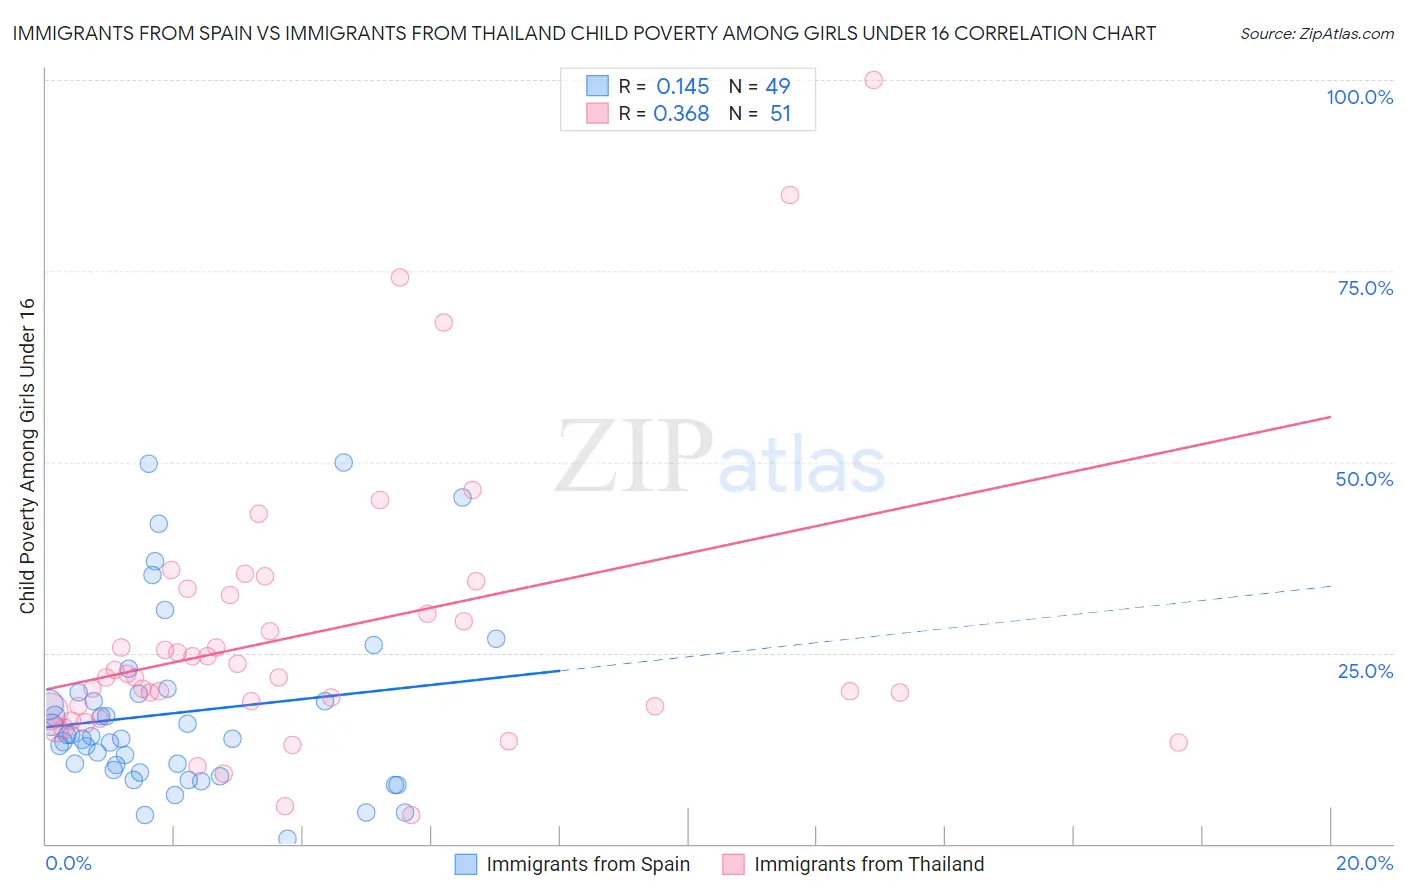 Immigrants from Spain vs Immigrants from Thailand Child Poverty Among Girls Under 16